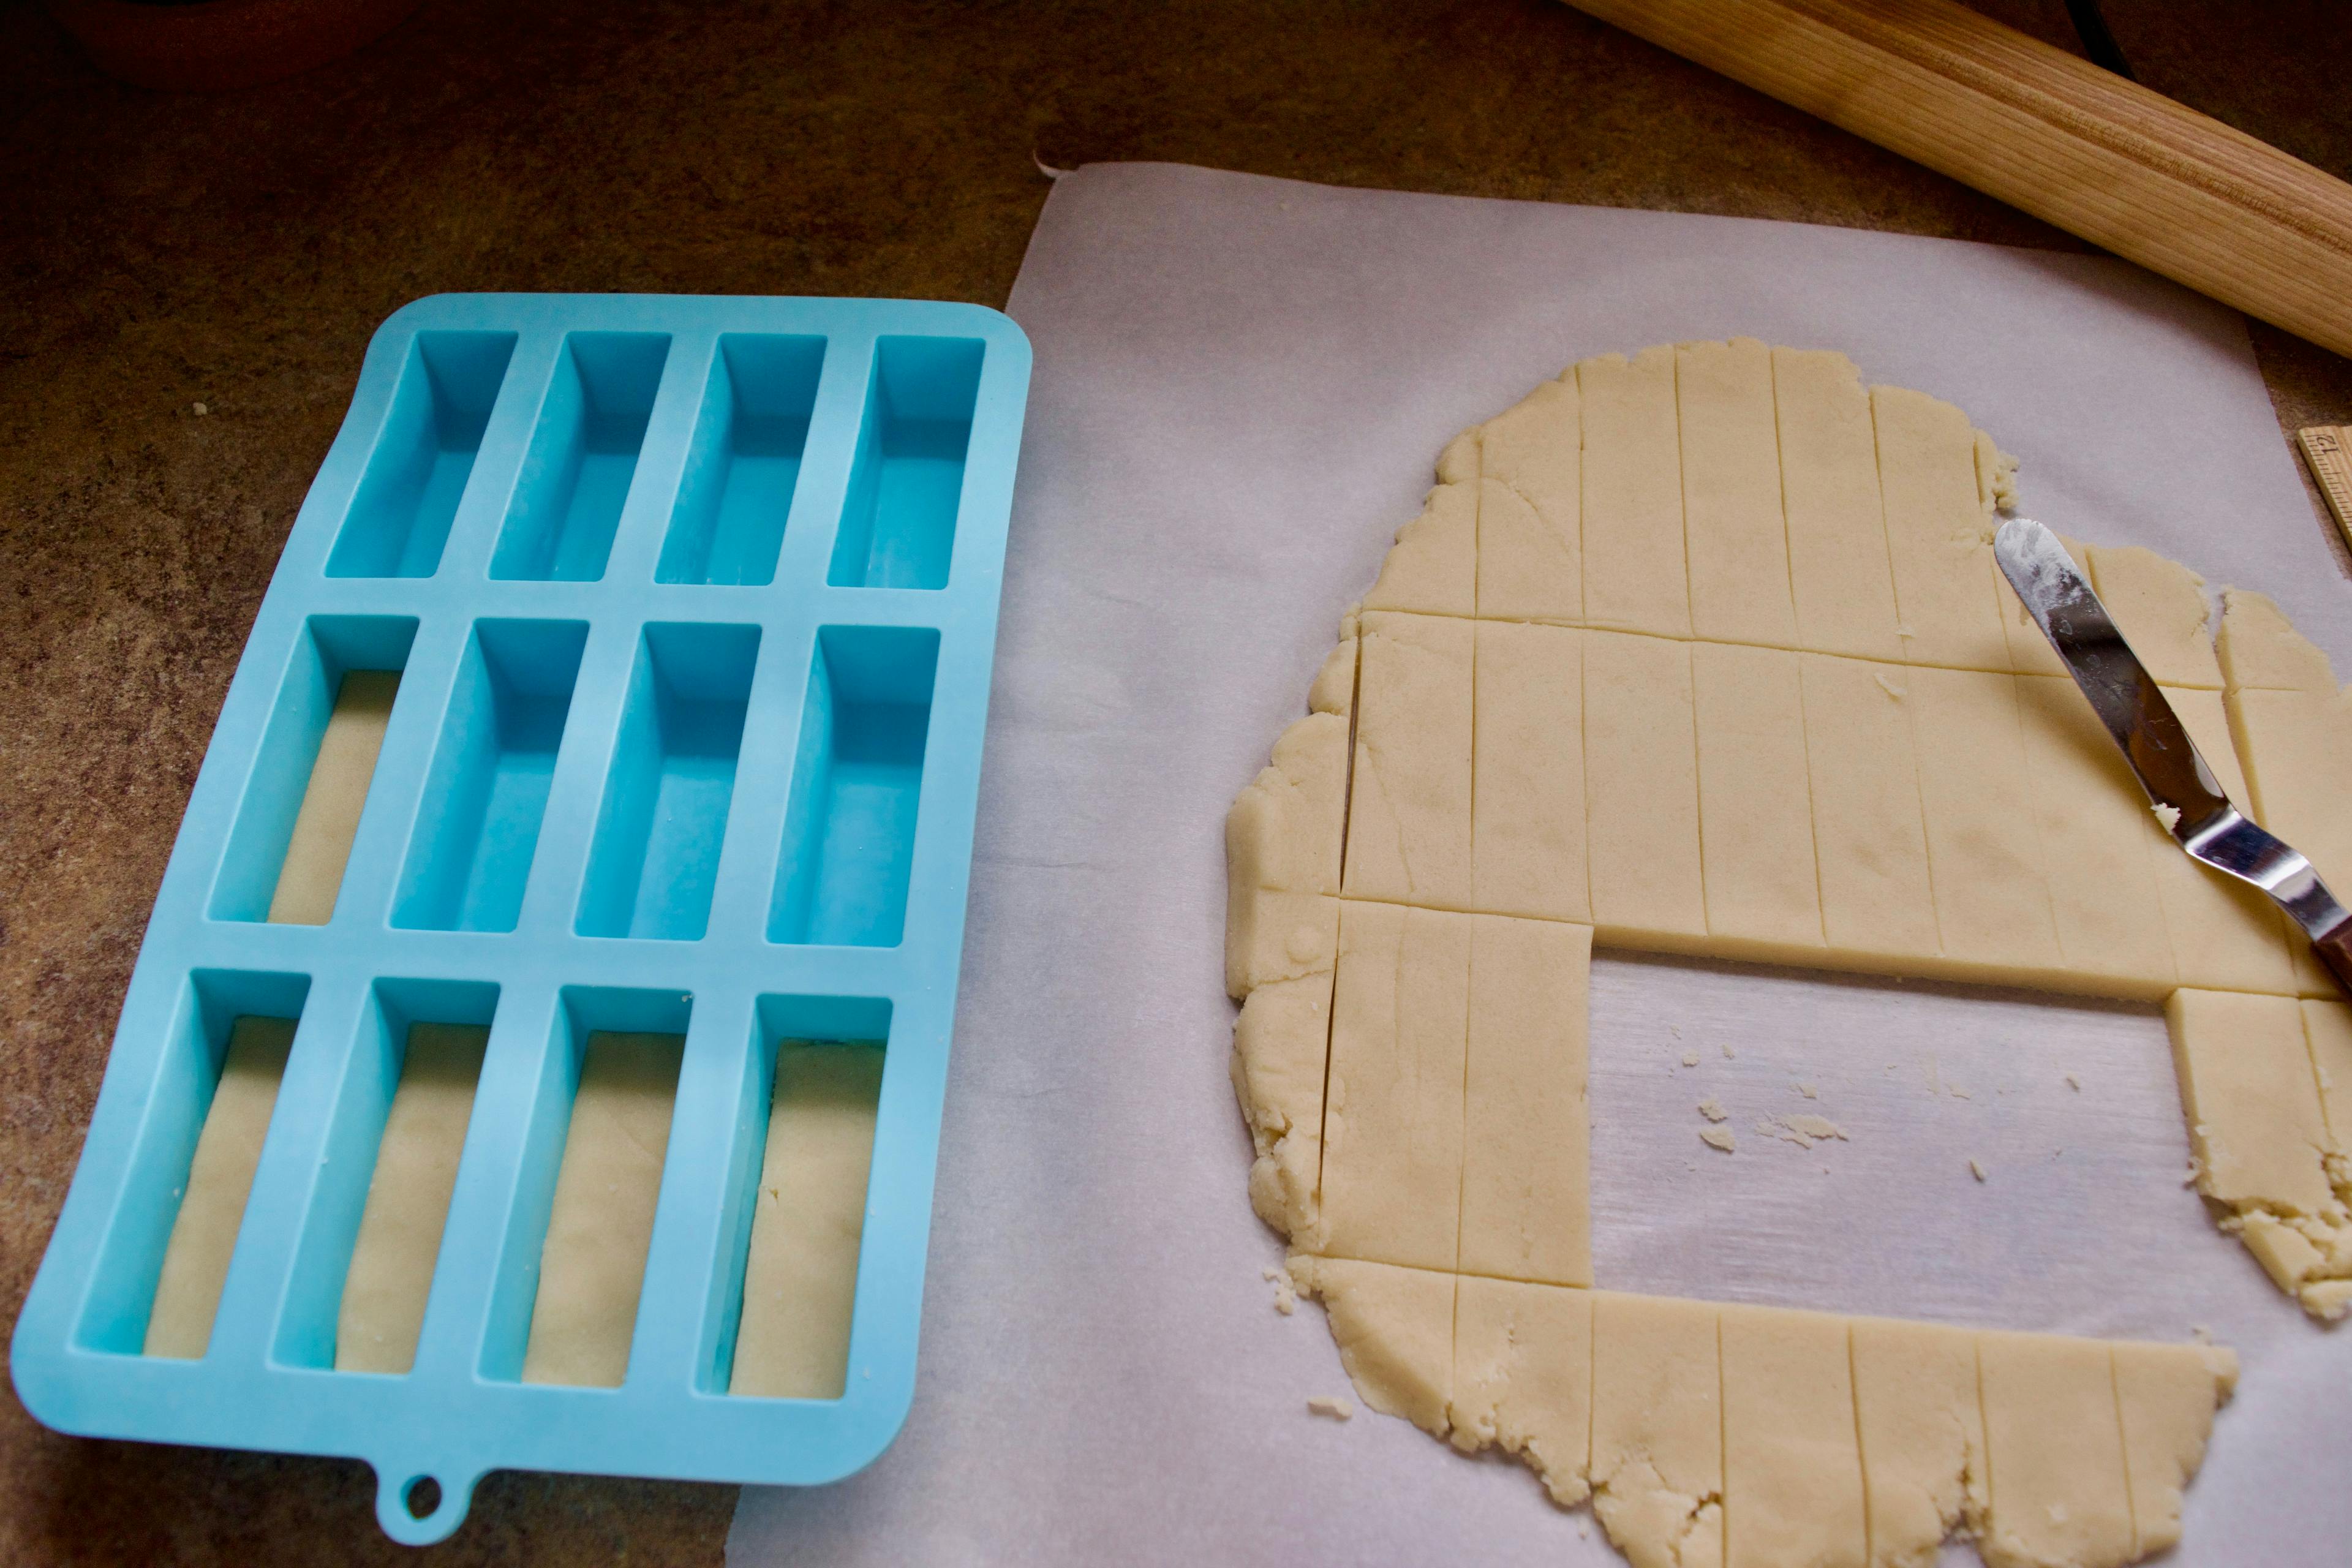 Placing the cut rectangles of dough into a blue silicone mold of 12 small rectangles.